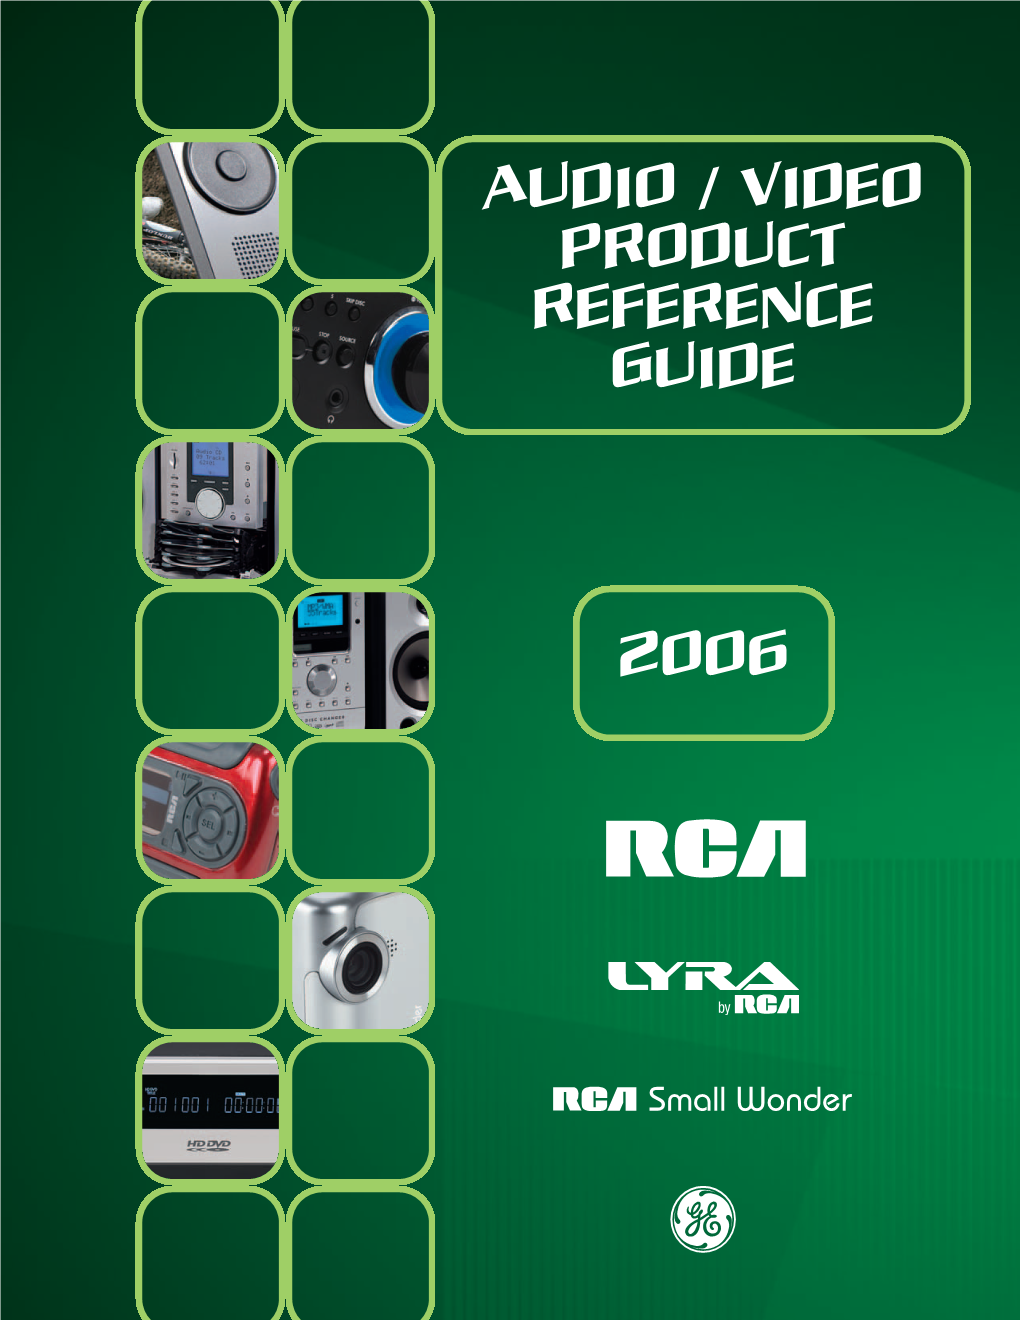 2006 Audio / Video Product Reference Guide